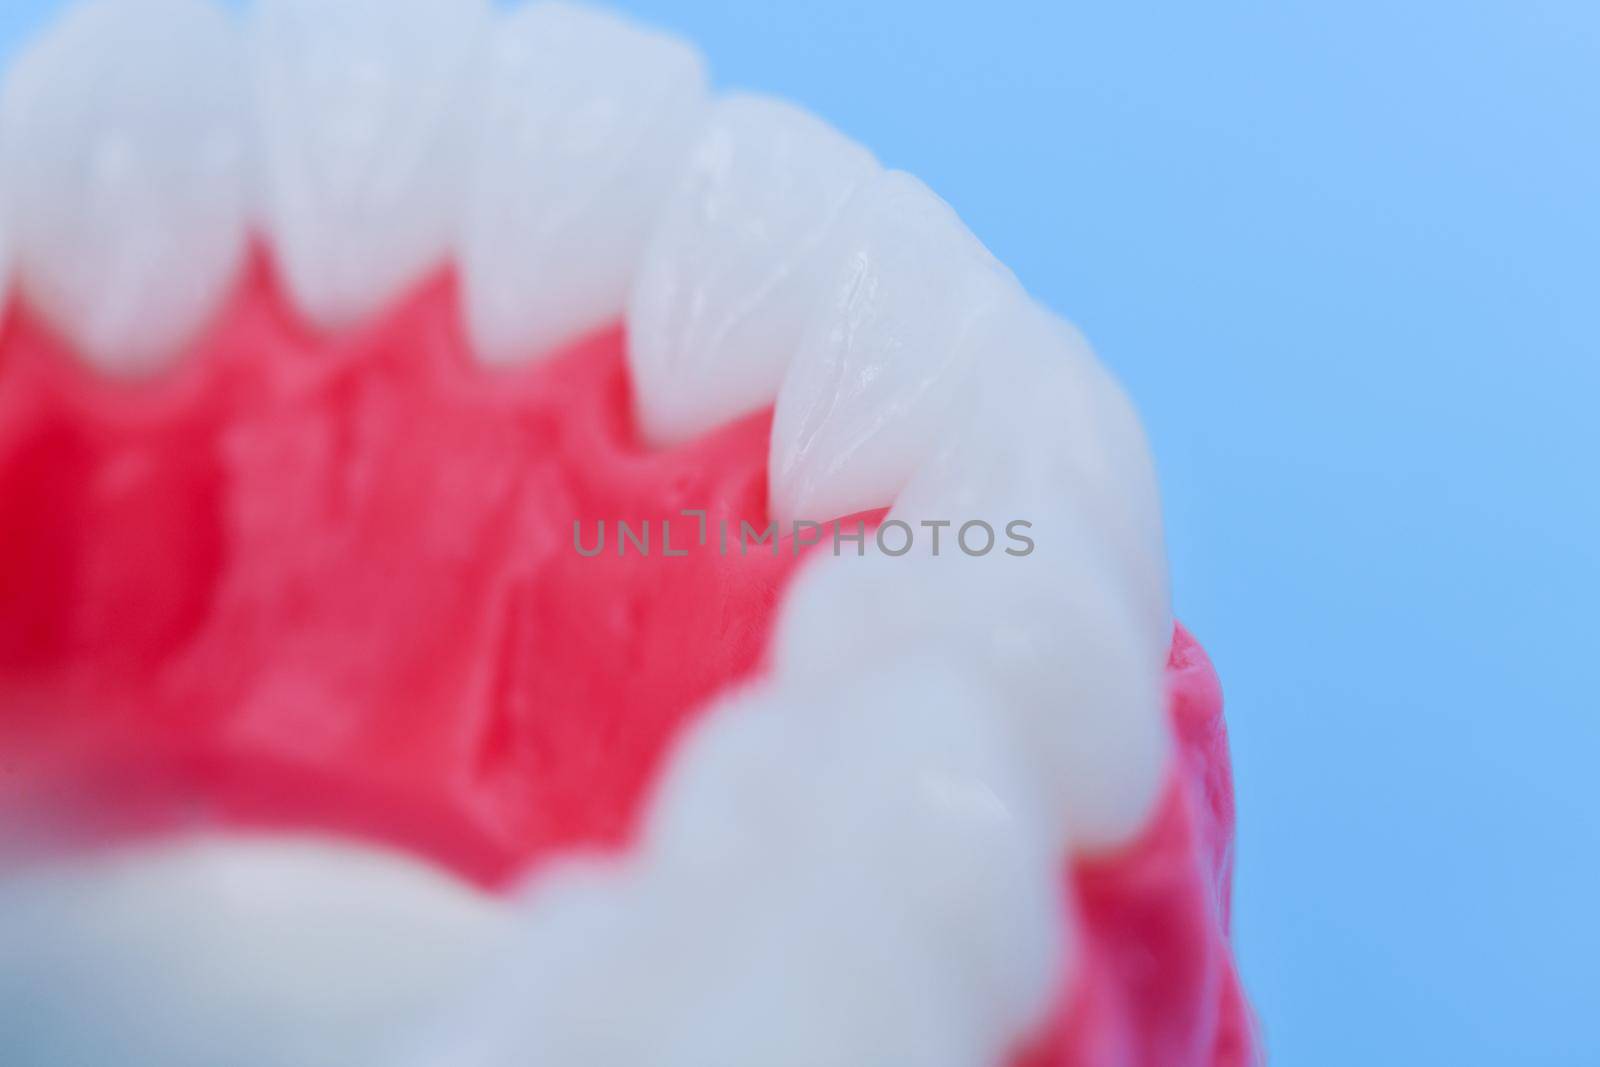 Lower human jaw with teeth and gums anatomy model medical illustration isolated on blue background. Healthy teeth, dental care and orthodontic concept